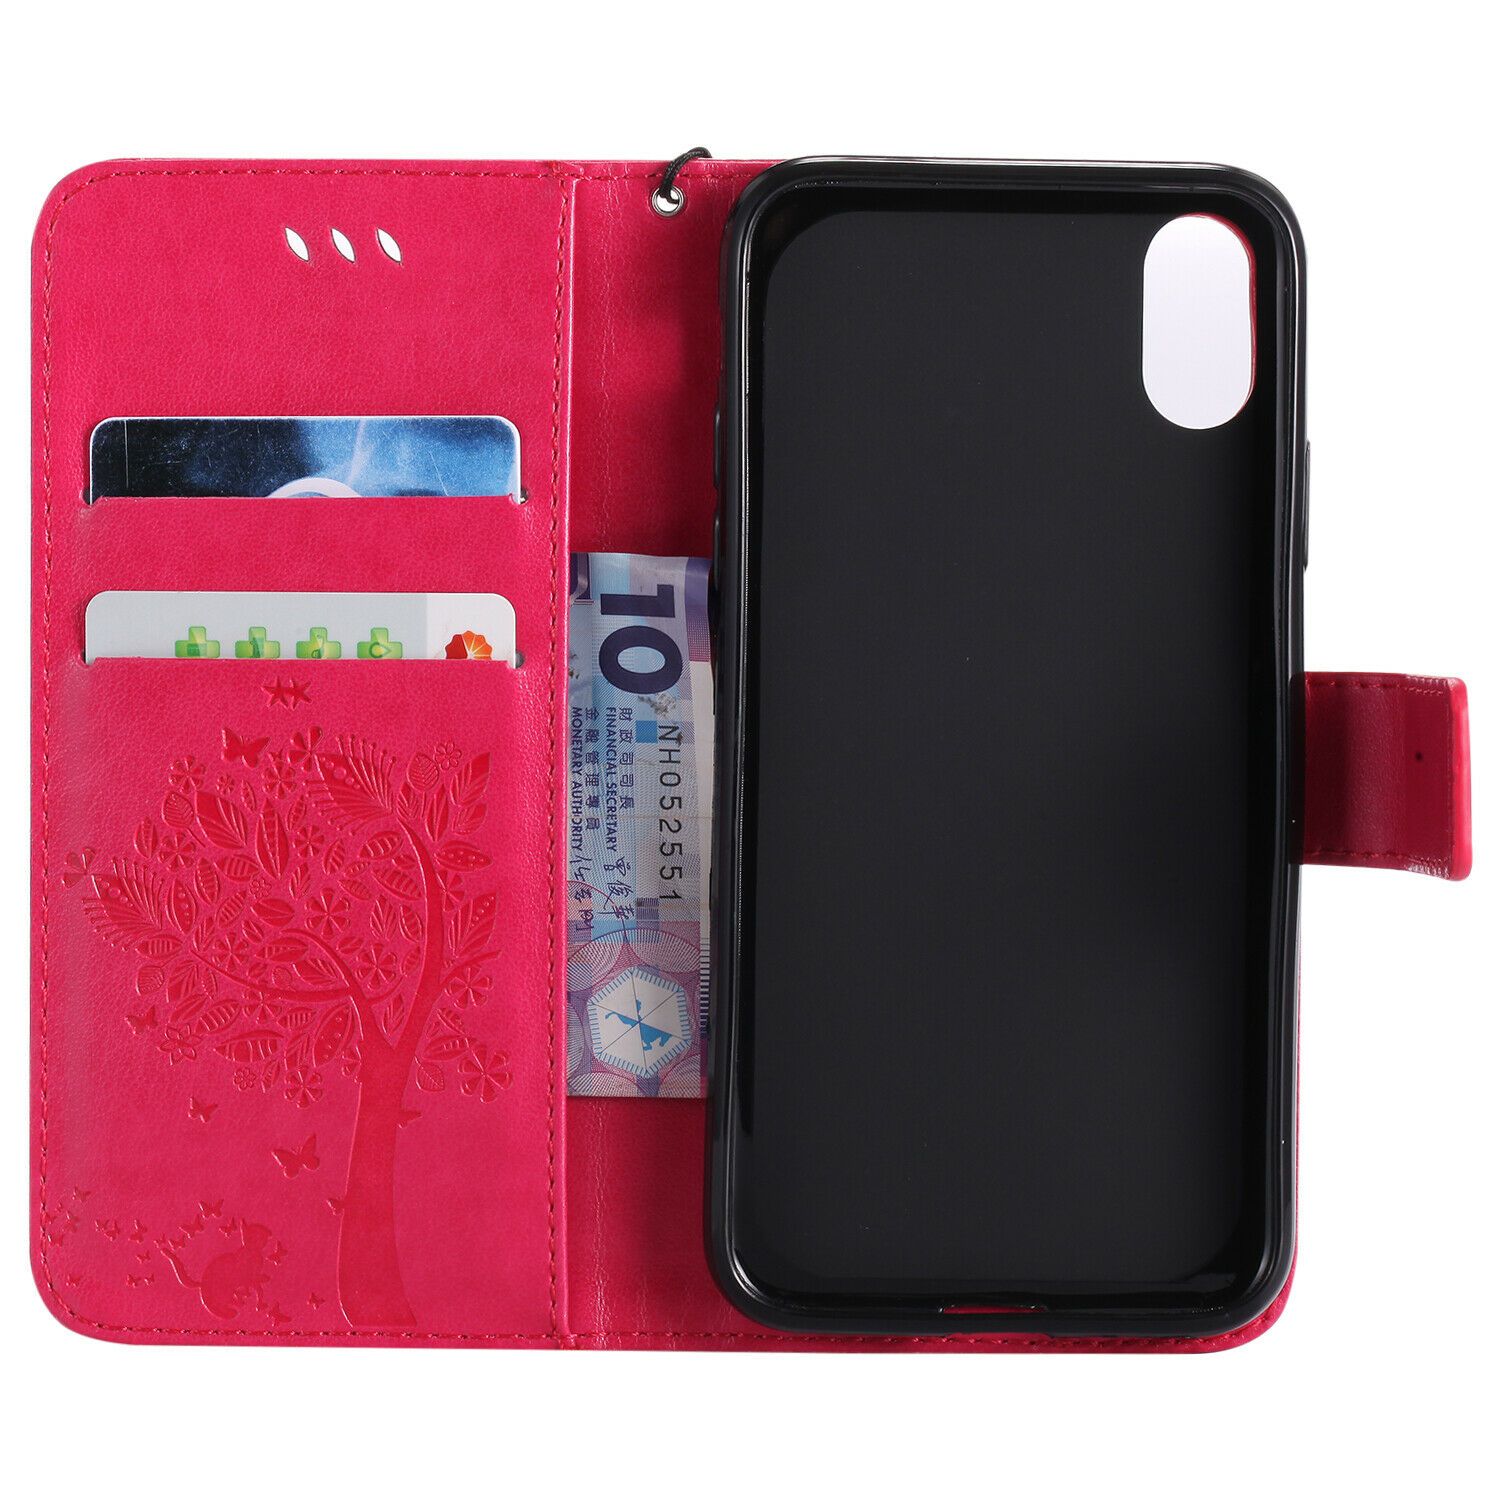 Magnetic Leather Wallet Case For iPhone 8 7 6s Plus X XS MAX XR Flip Cover Stand stekim-92 